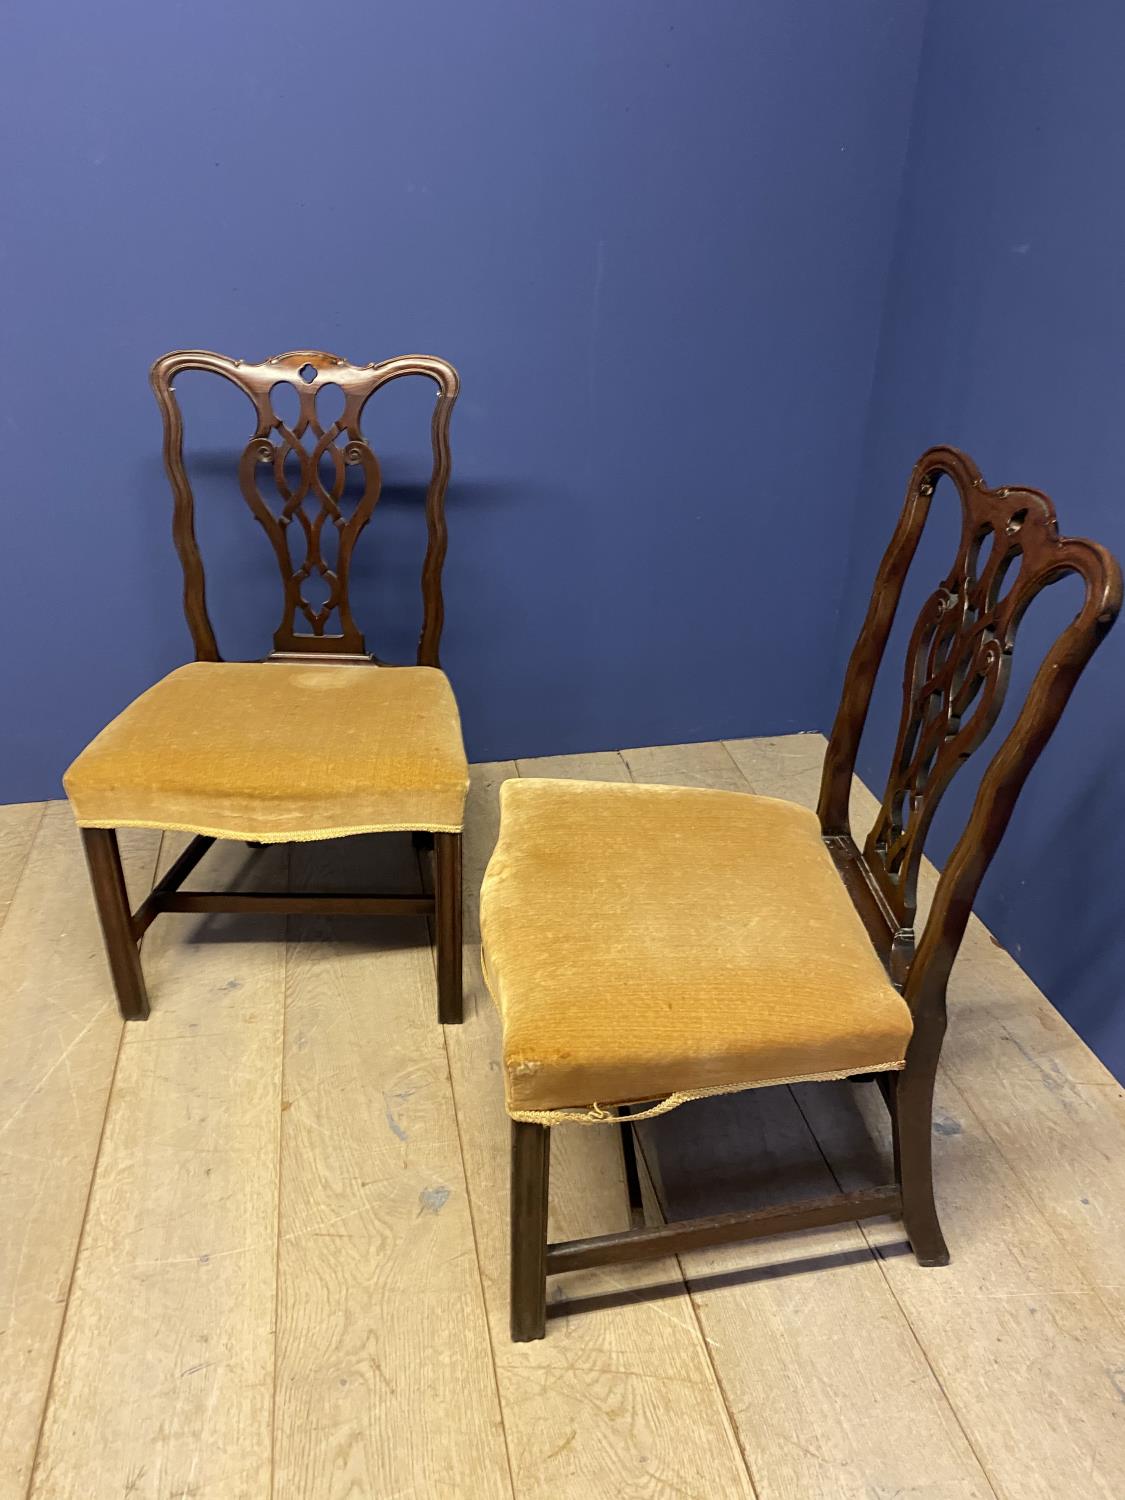 Pair of good C19th mahogany Chippendale style side chairs - Image 3 of 3